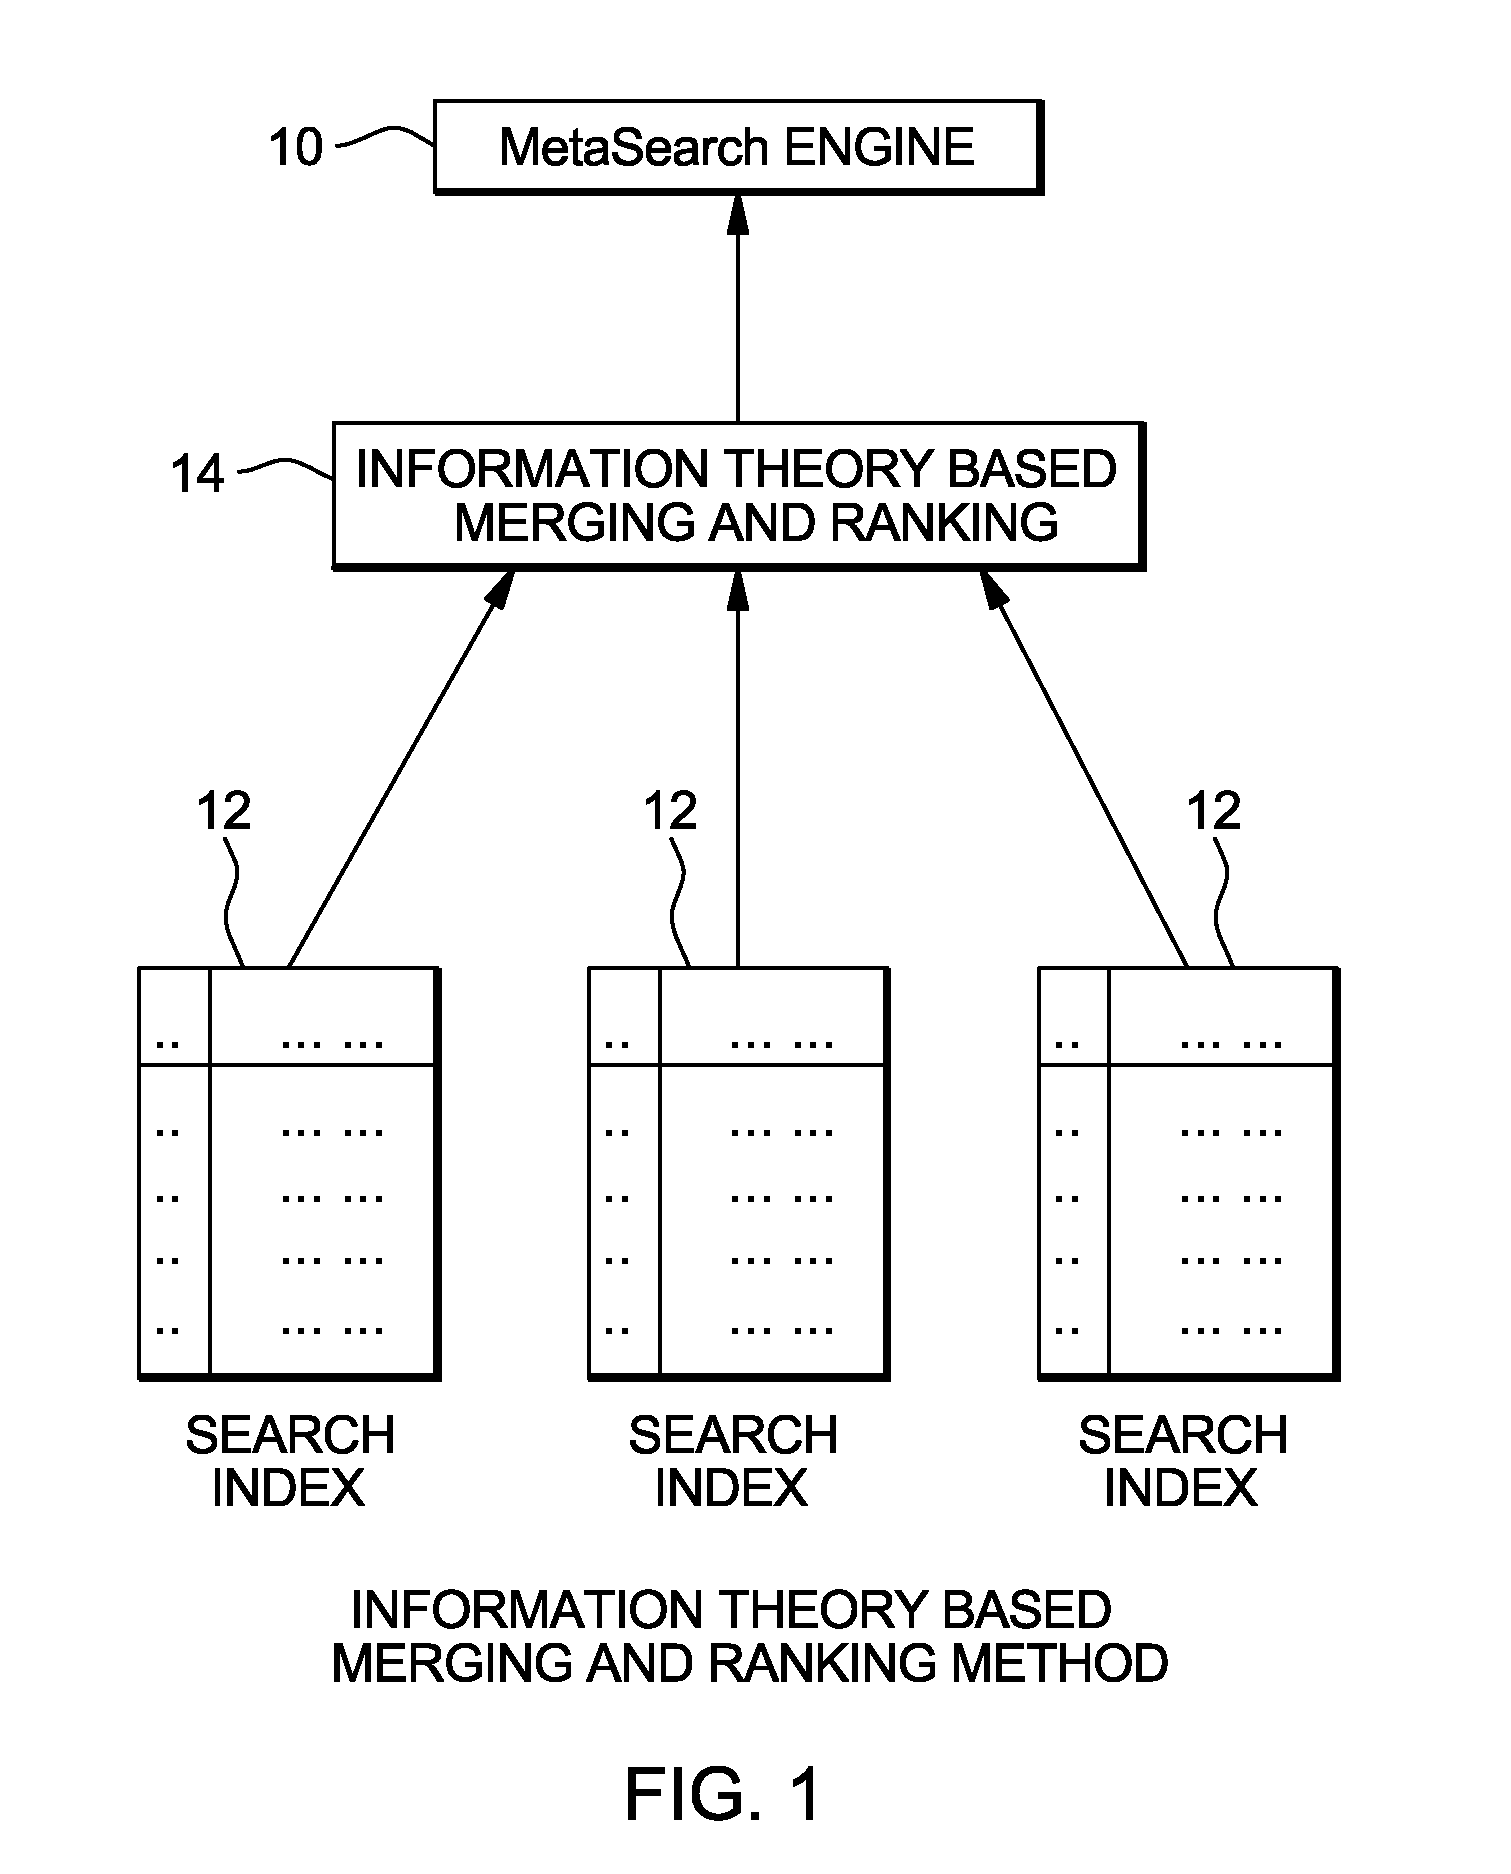 Information theory based result merging for searching hierarchical entities across heterogeneous data sources